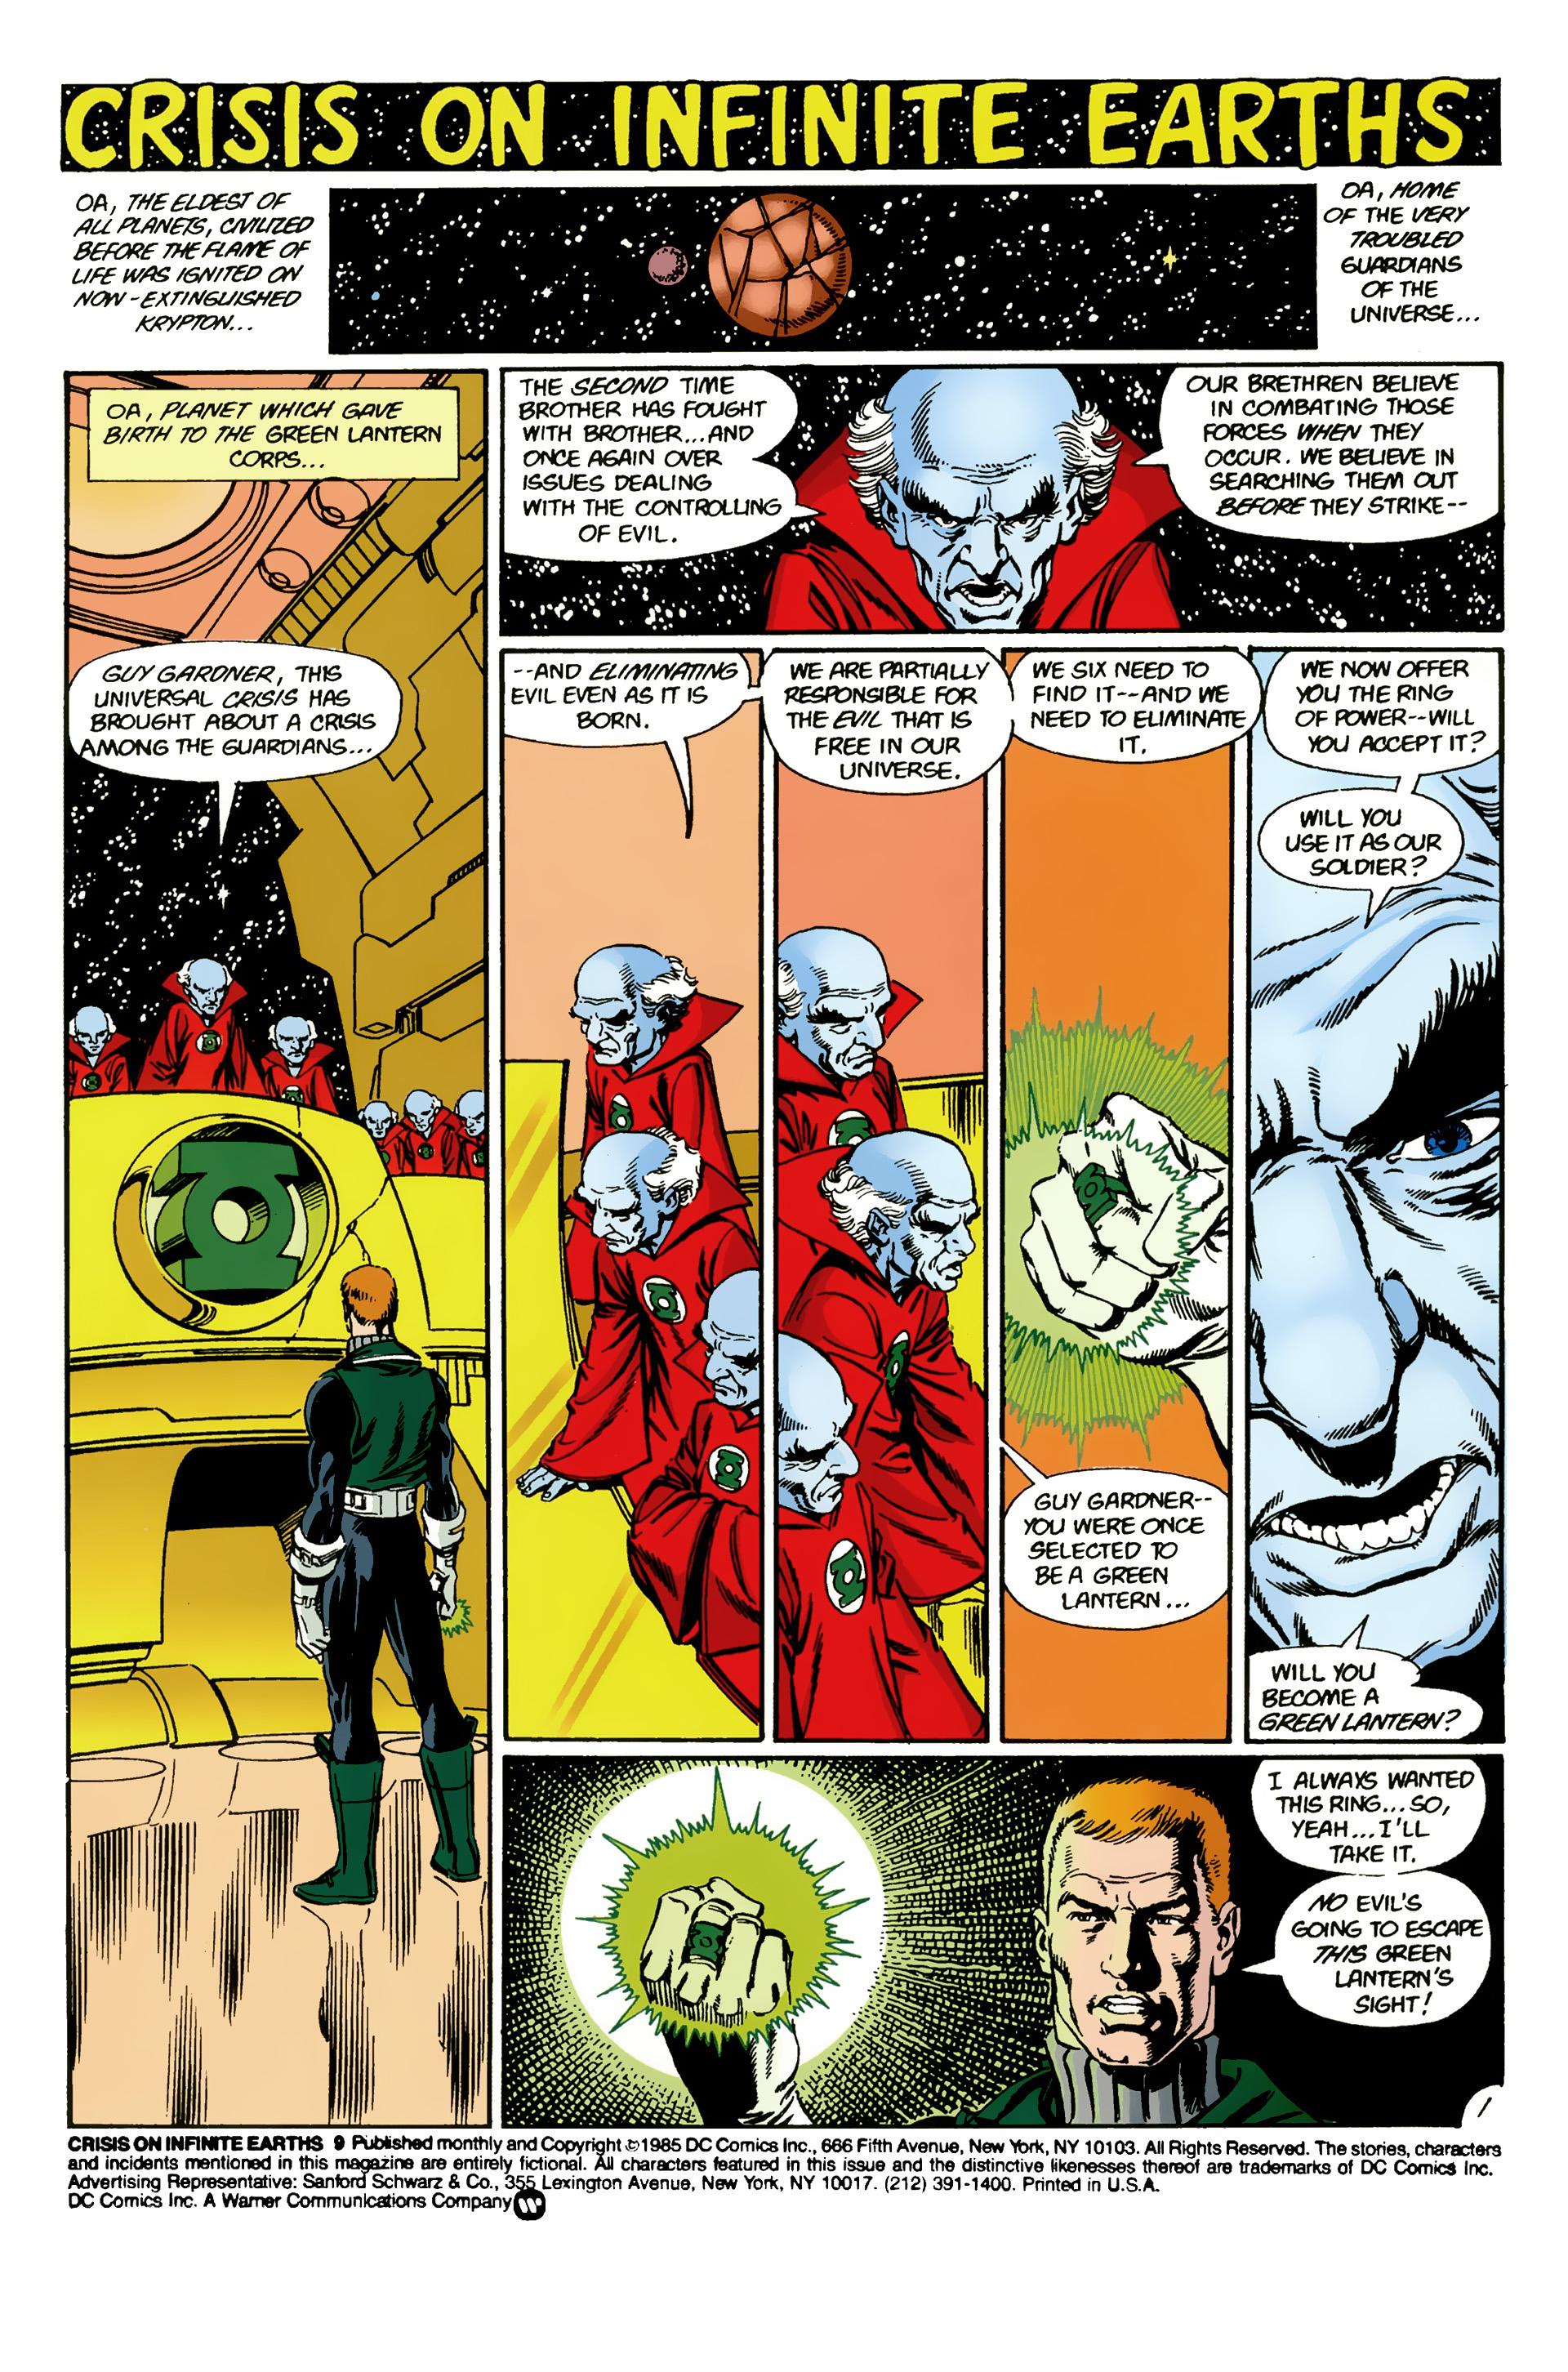 Crisis on Infinite Earths Omnibus (1985): Chapter Crisis-on-Infinite-Earths-50 - Page 2